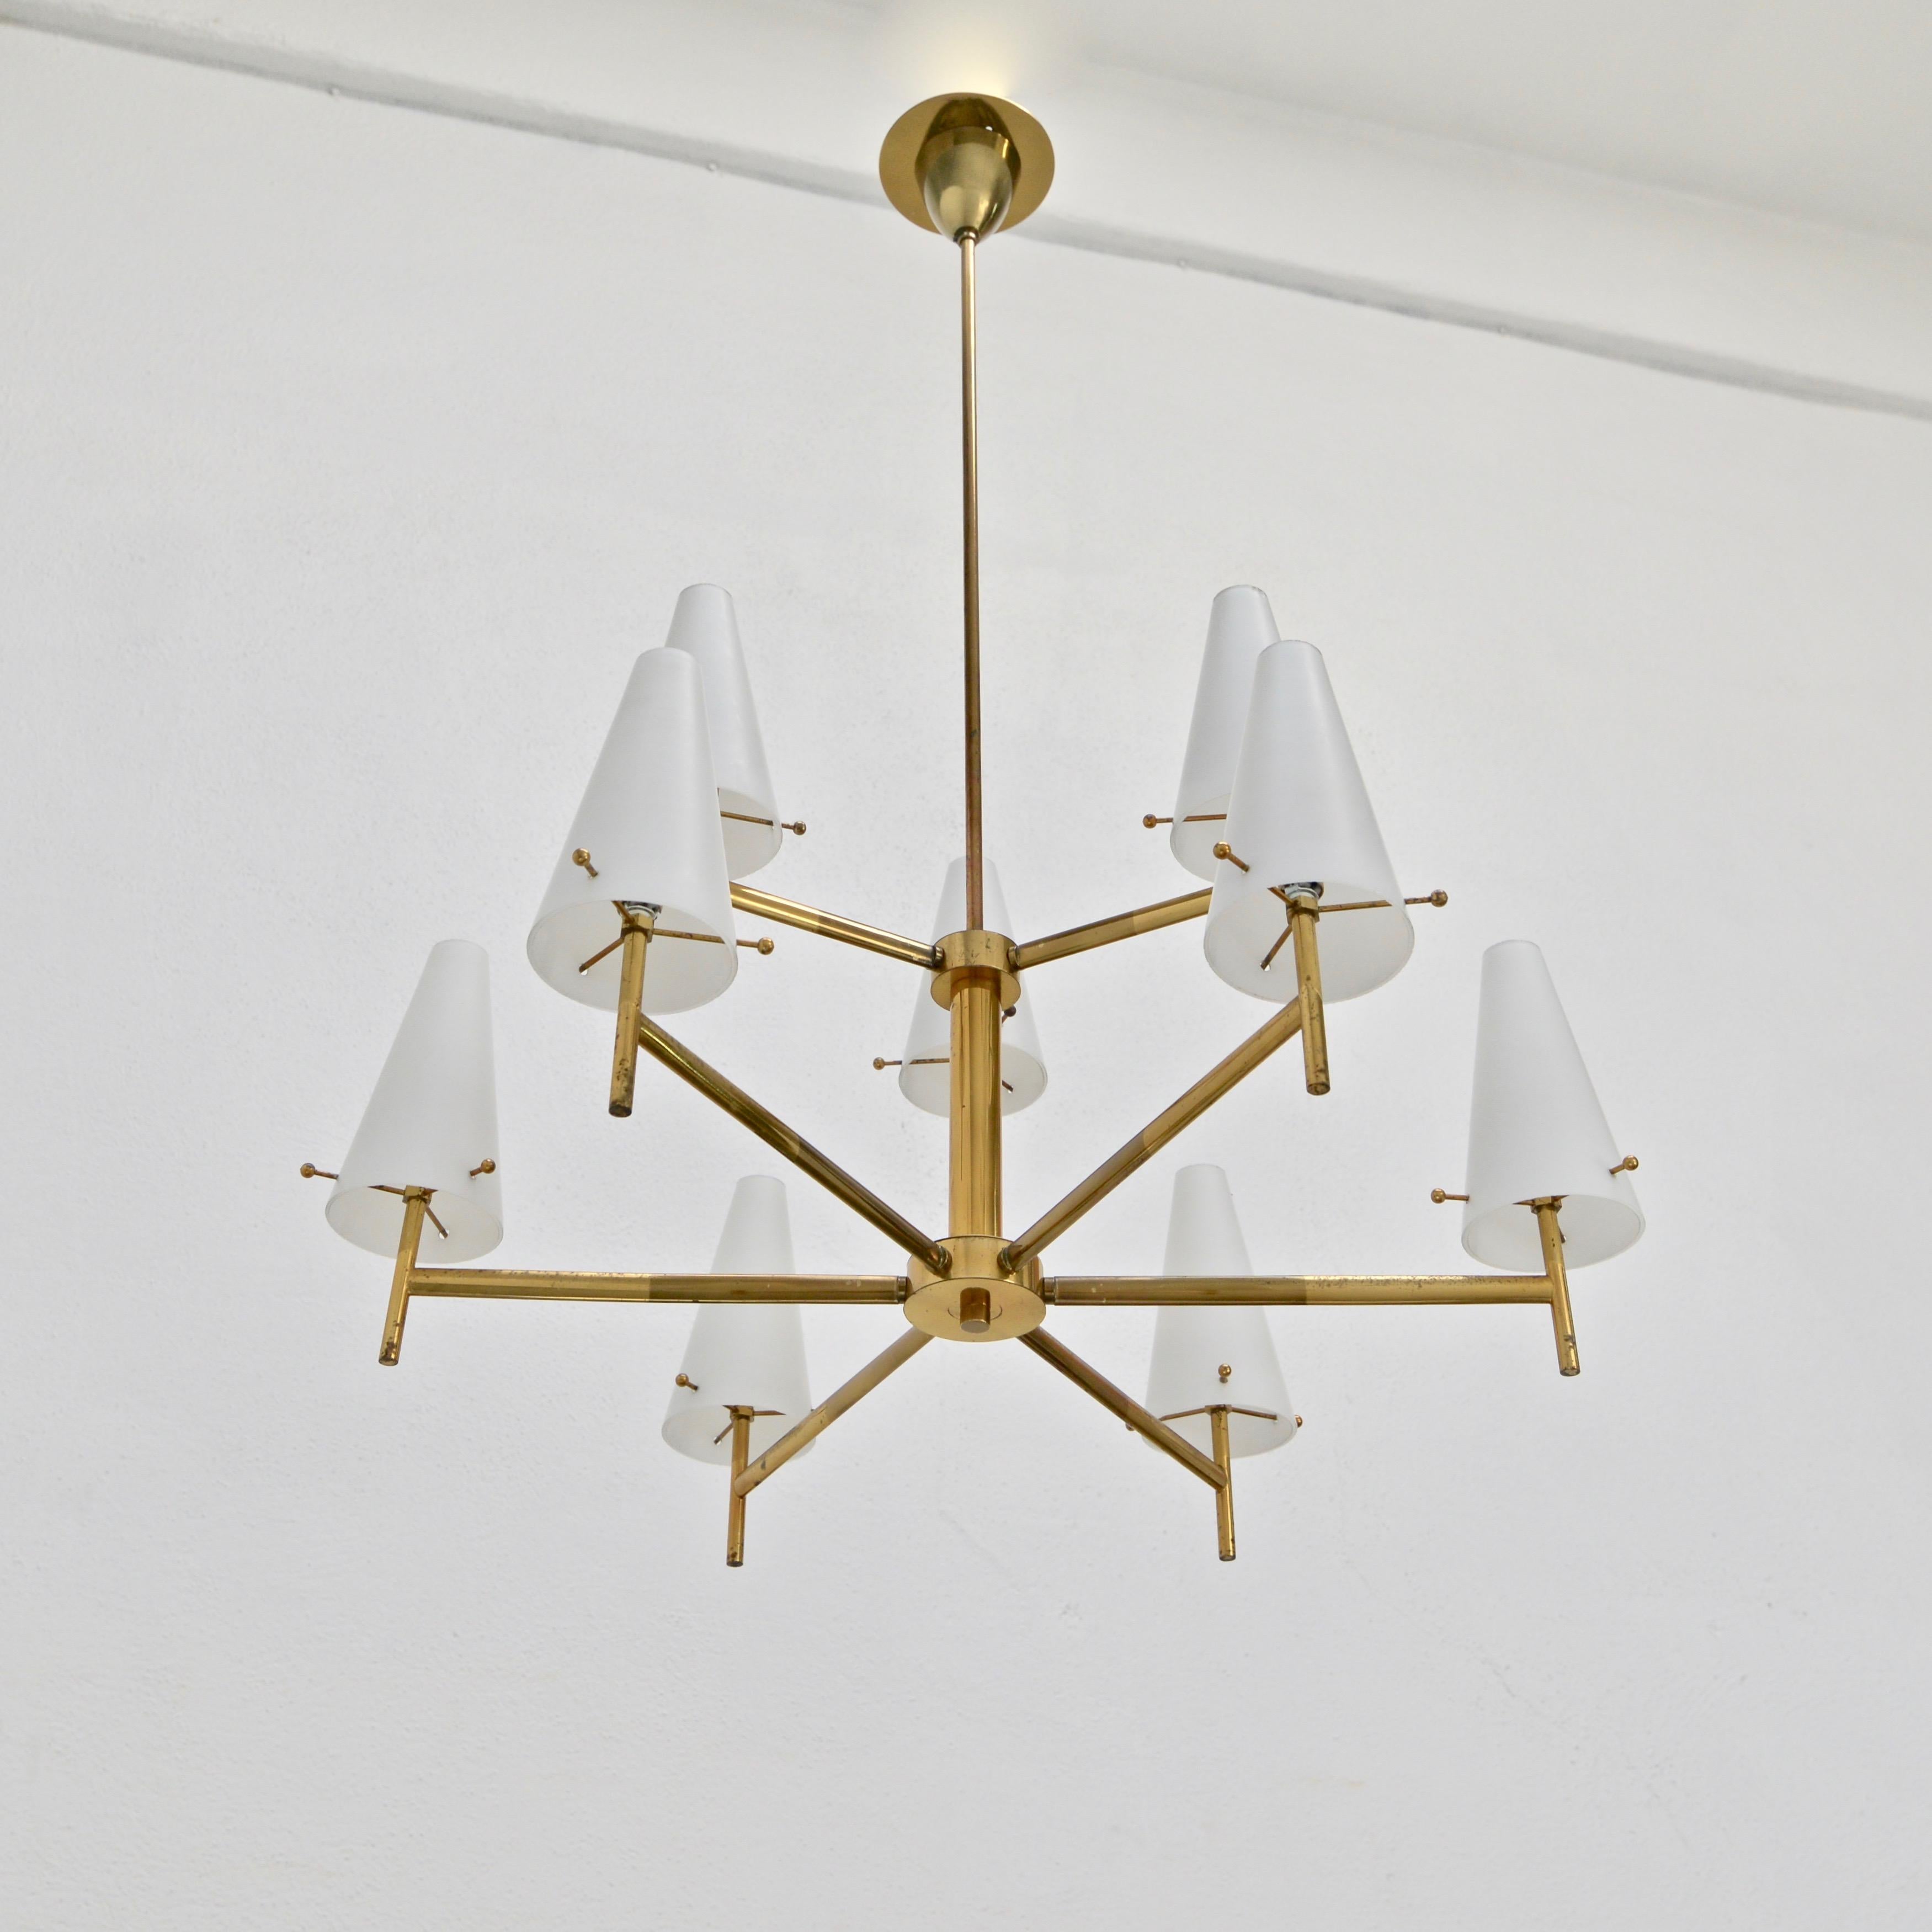 A beautiful classical midcentury 1950s Italian glass and naturally aged brass chandelier 9 glass shades with E12 candelabra based sockets per shade. Wired for use in the US. Light bulbs included with order.
Measurements:
OAD: 37” 
Diameter